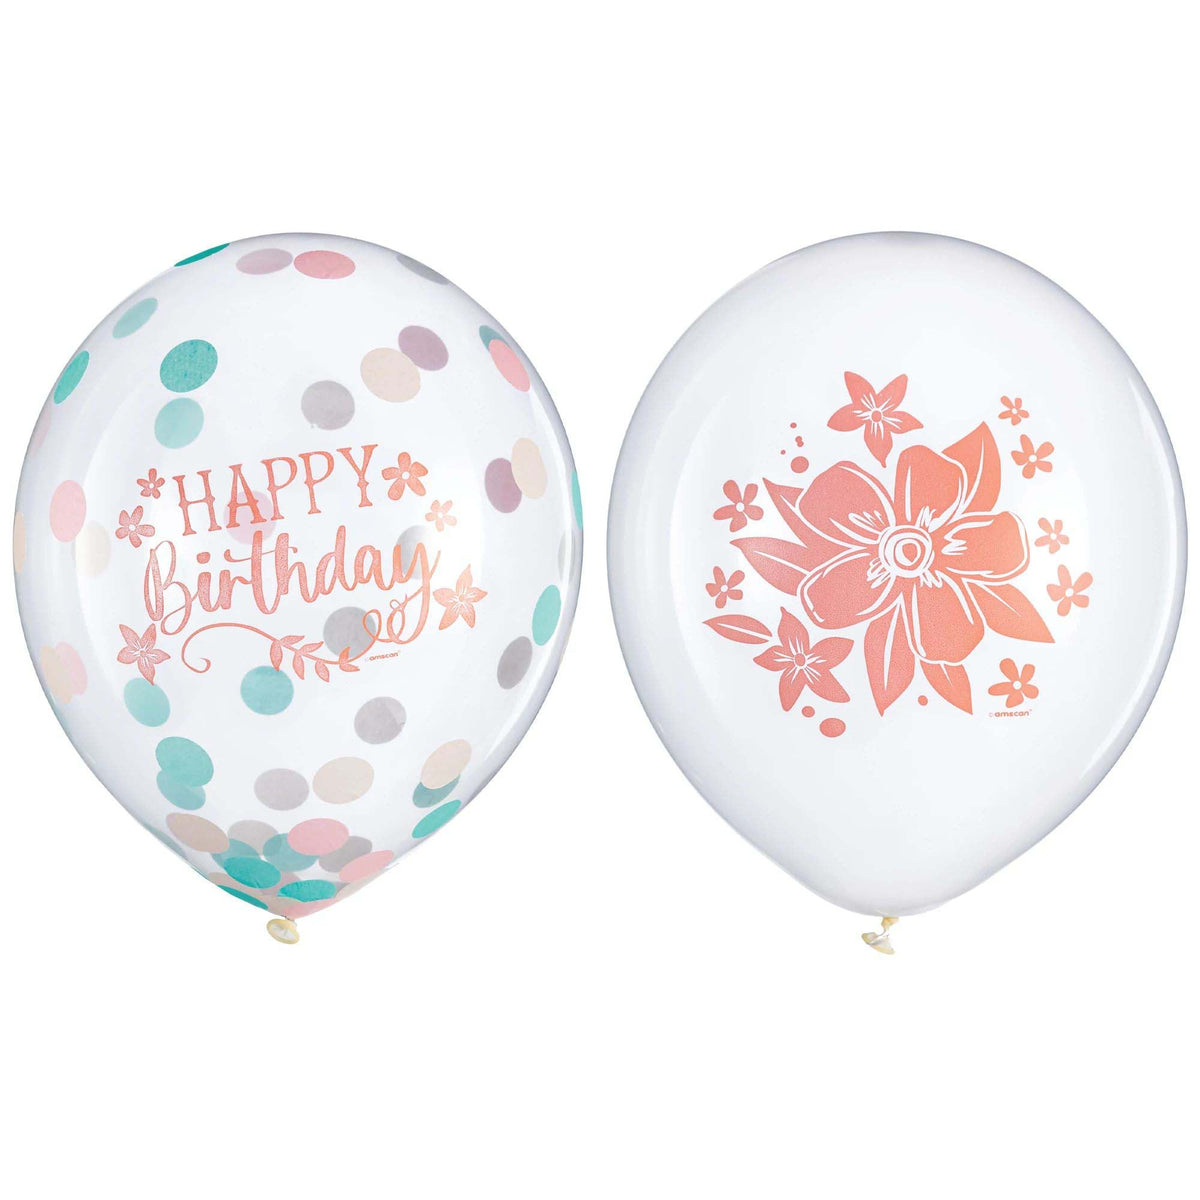 AMSCAN CA 1st Birthday Free Spirit Printed Latex Balloons with Confetti, 12 Inches, 6 Count